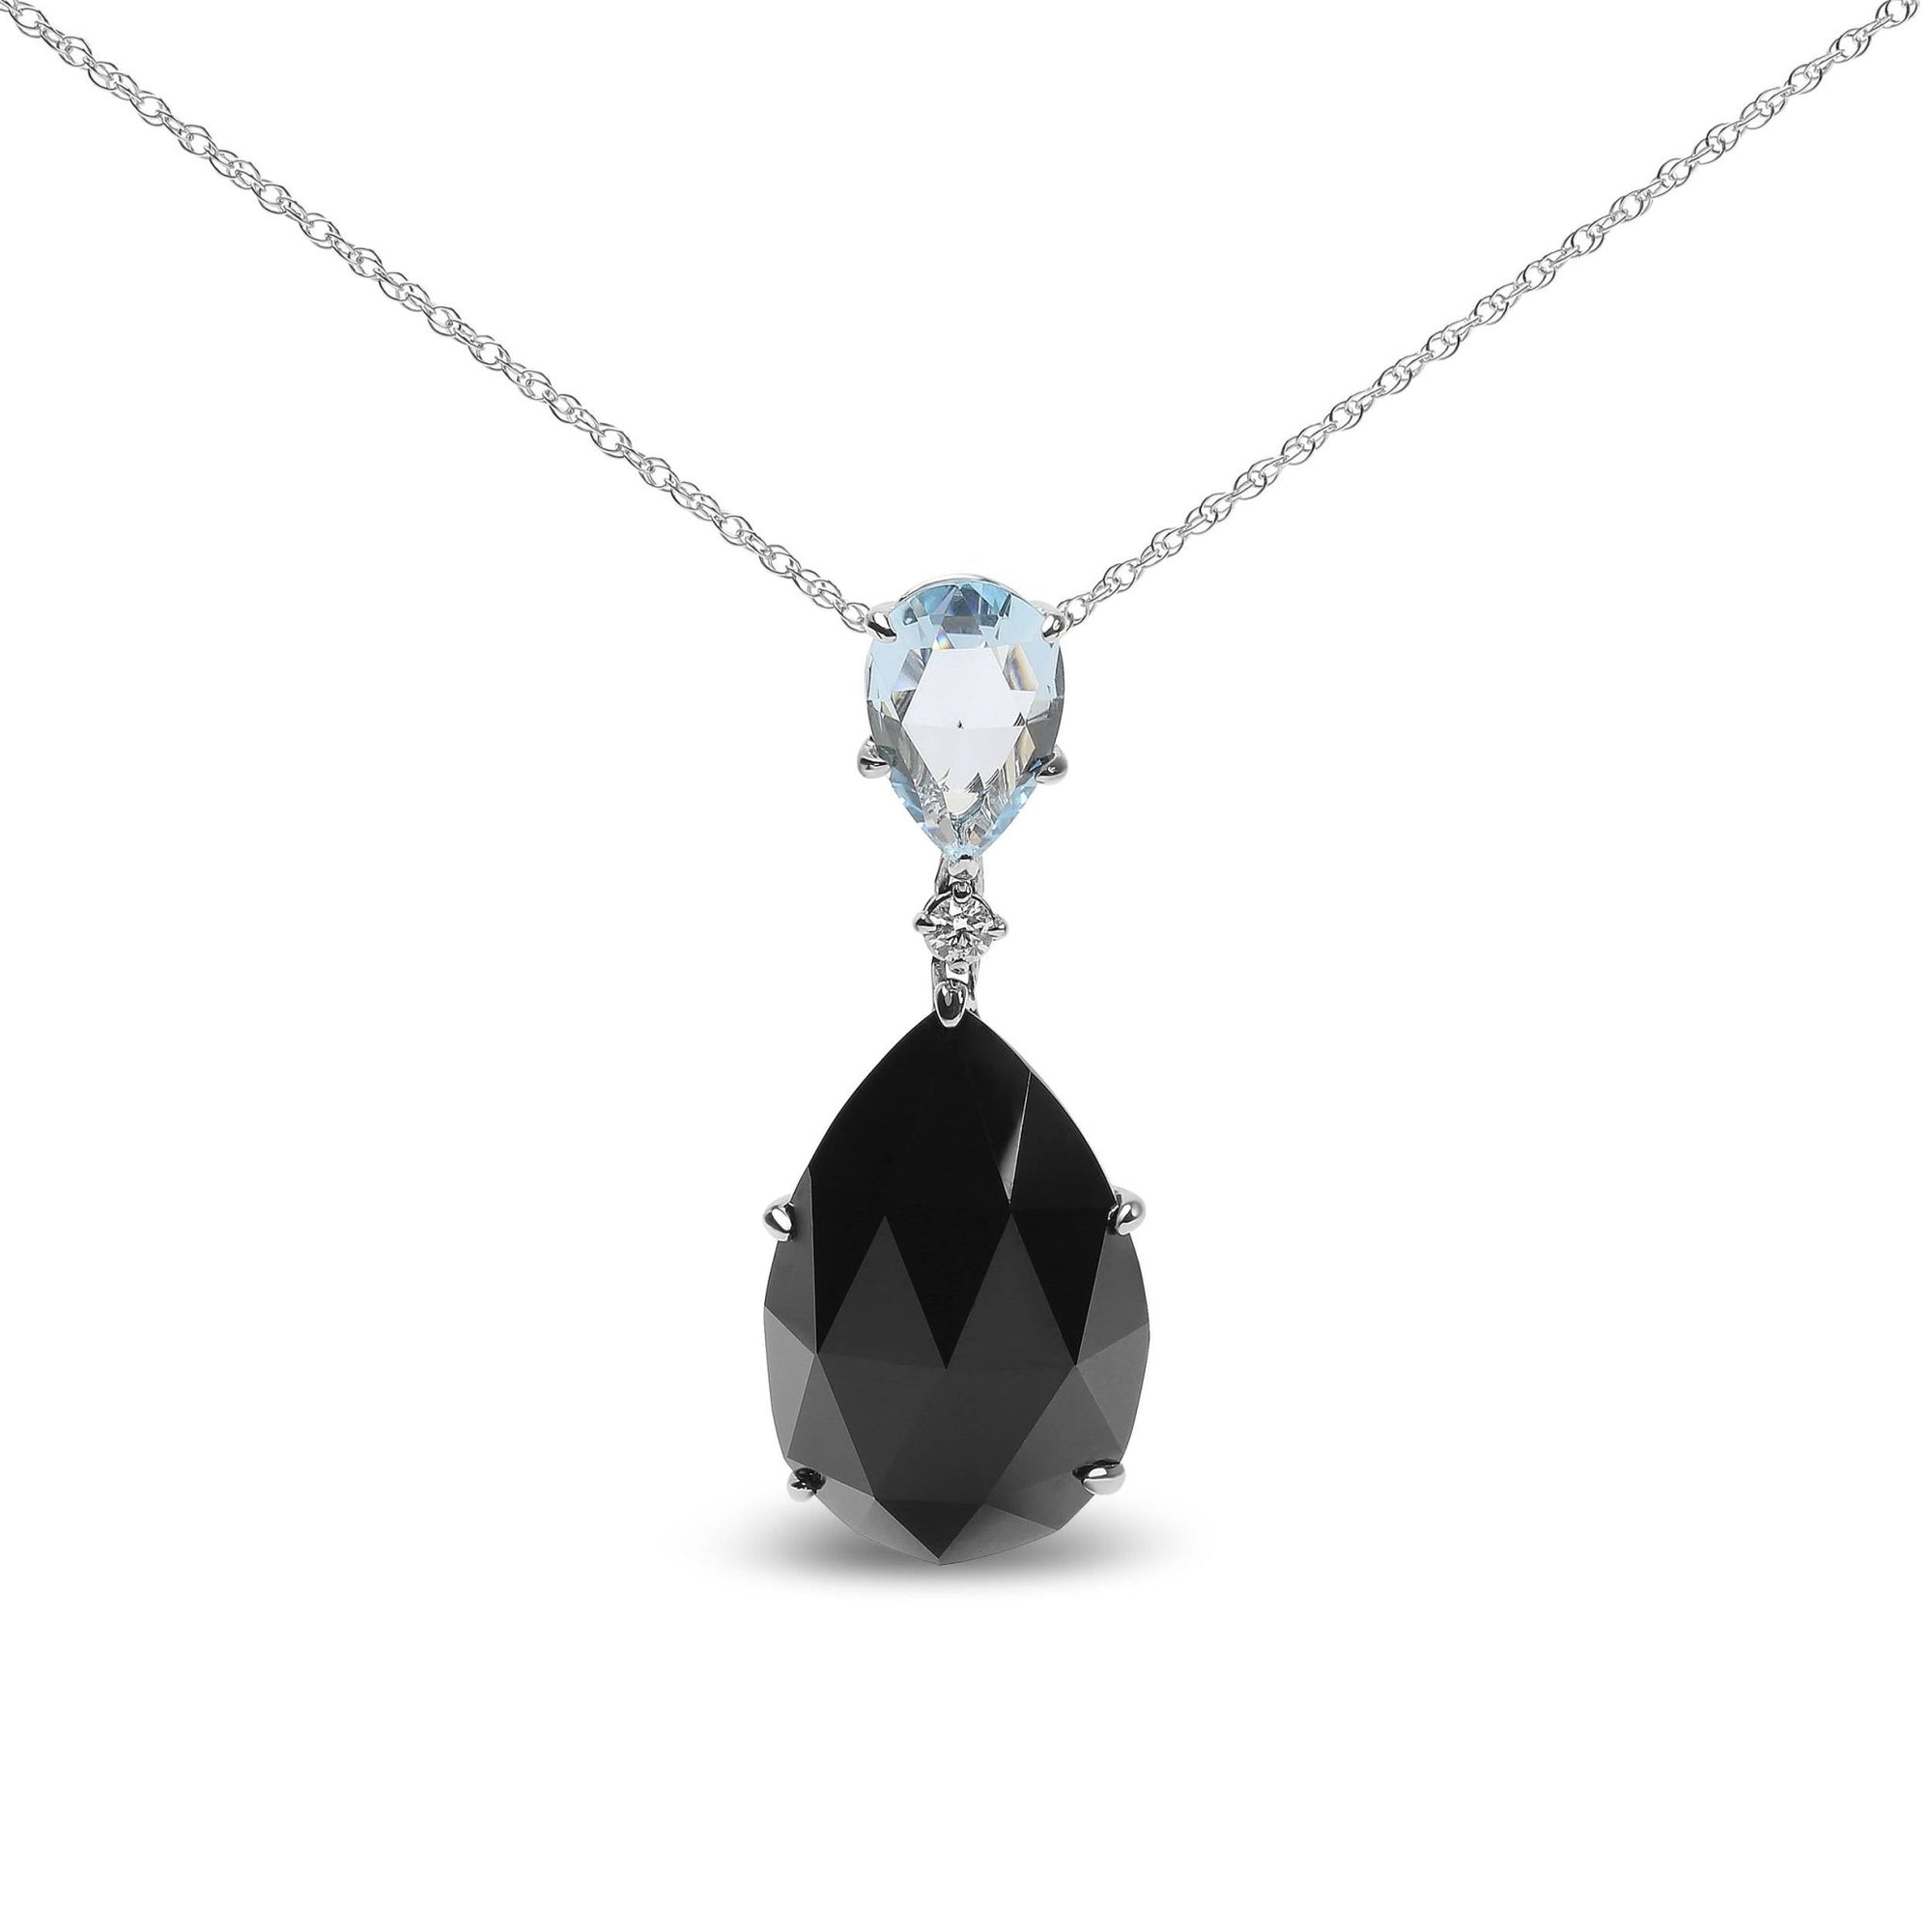 18K White Gold Diamond Accent and Pear Cut Sky Blue Topaz and Pear Cut Black Onyx Dangle Drop 18" Pendant Necklace (G-H Color, SI1-SI2 Clarity) - LinkagejewelrydesignLinkagejewelrydesign